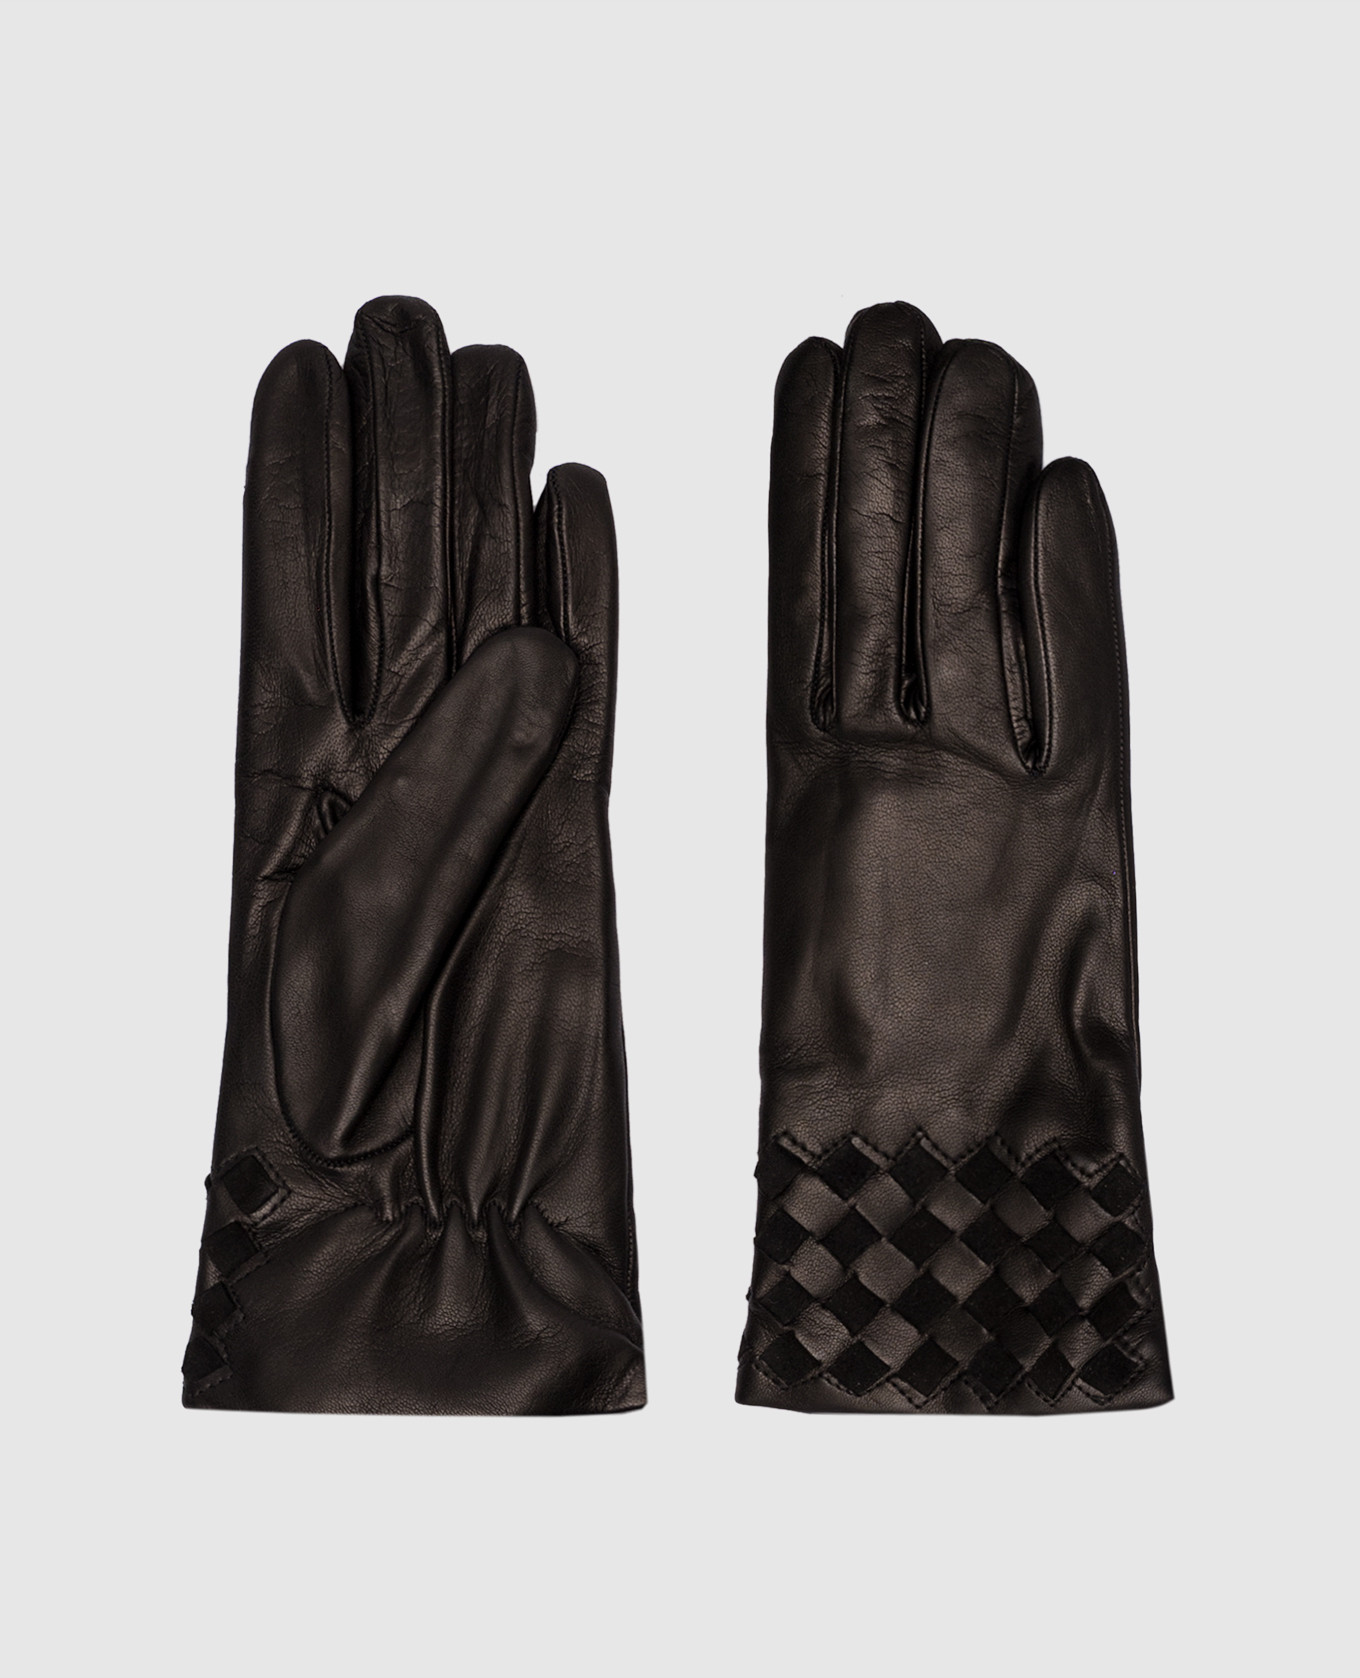 Black leather gloves with weaving